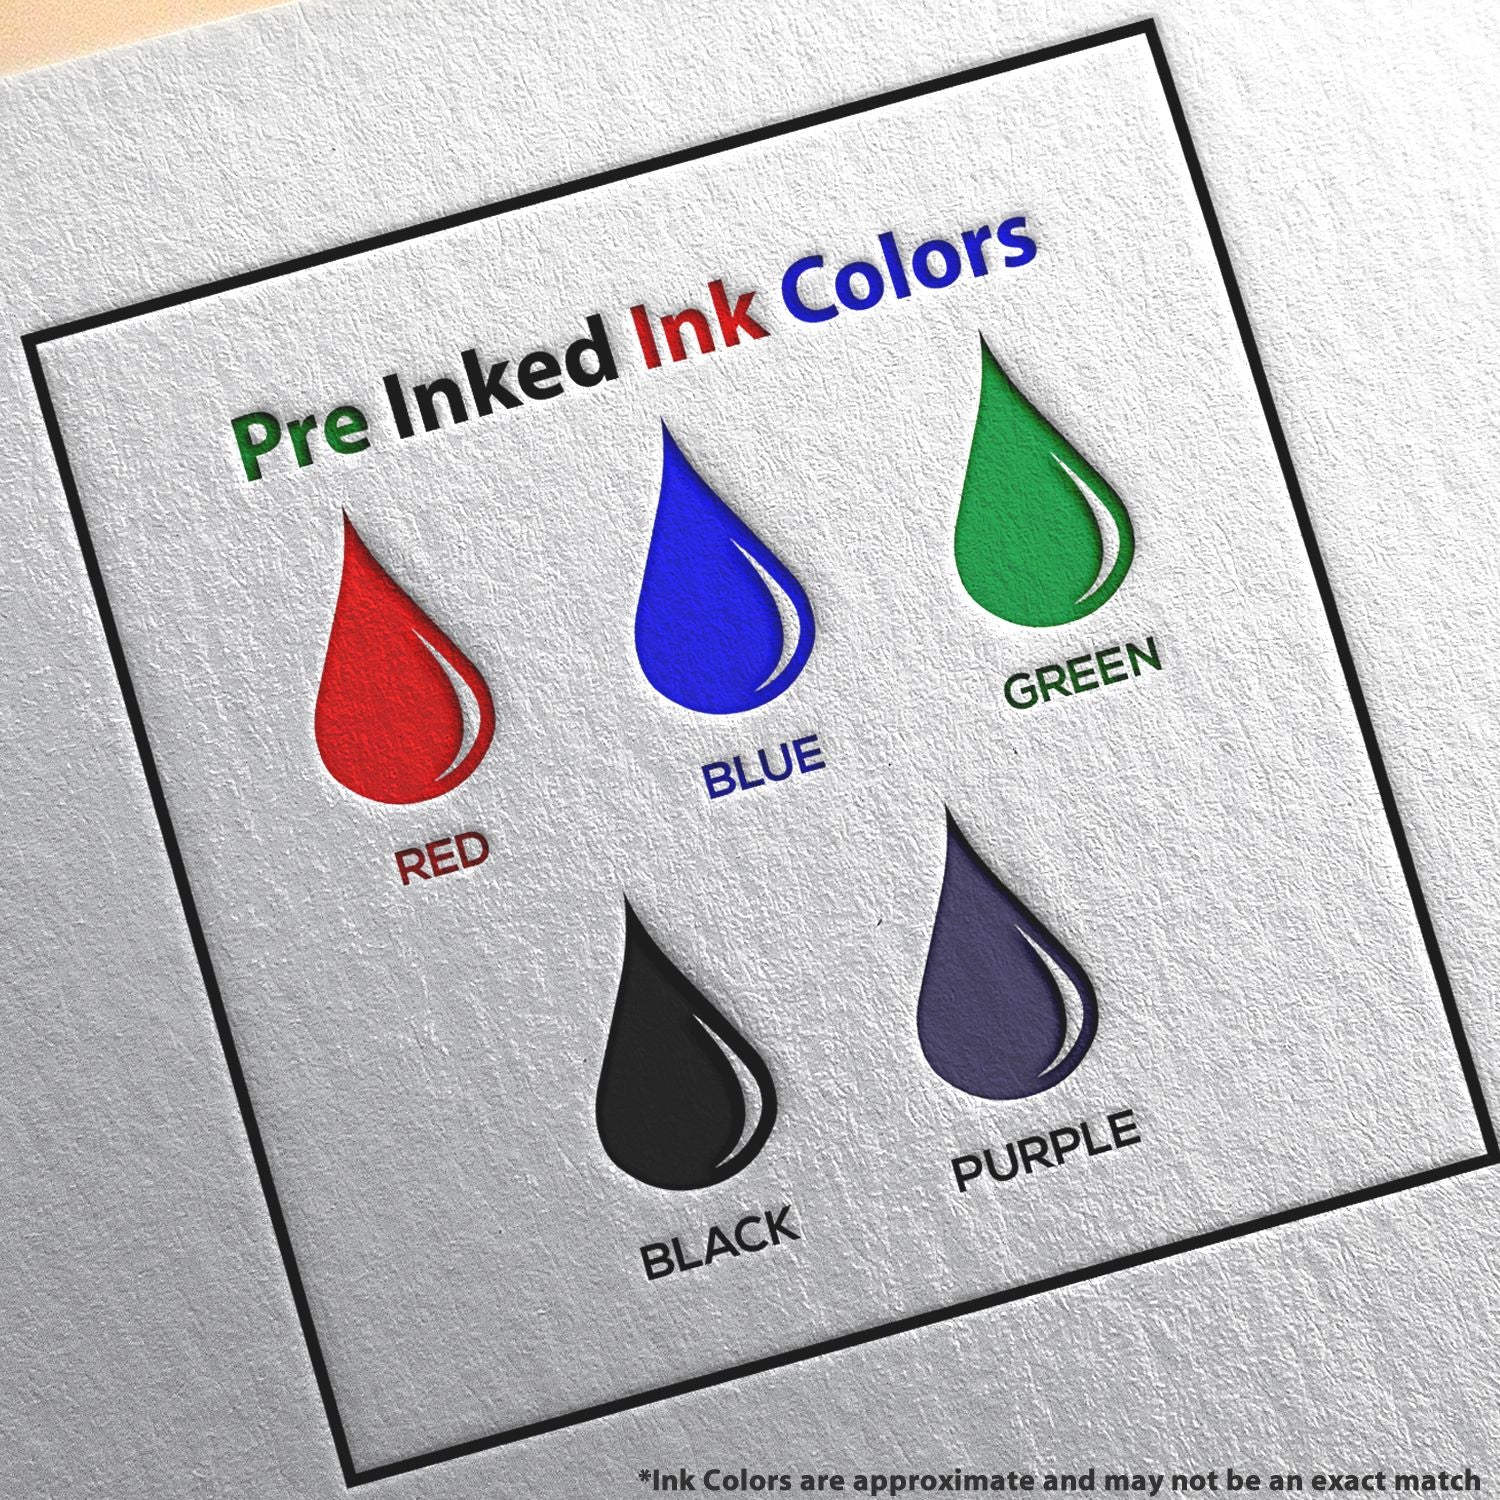 A picture showing the different ink colors or hues available for the Slim Pre-Inked Arkansas Professional Engineer Seal Stamp product.